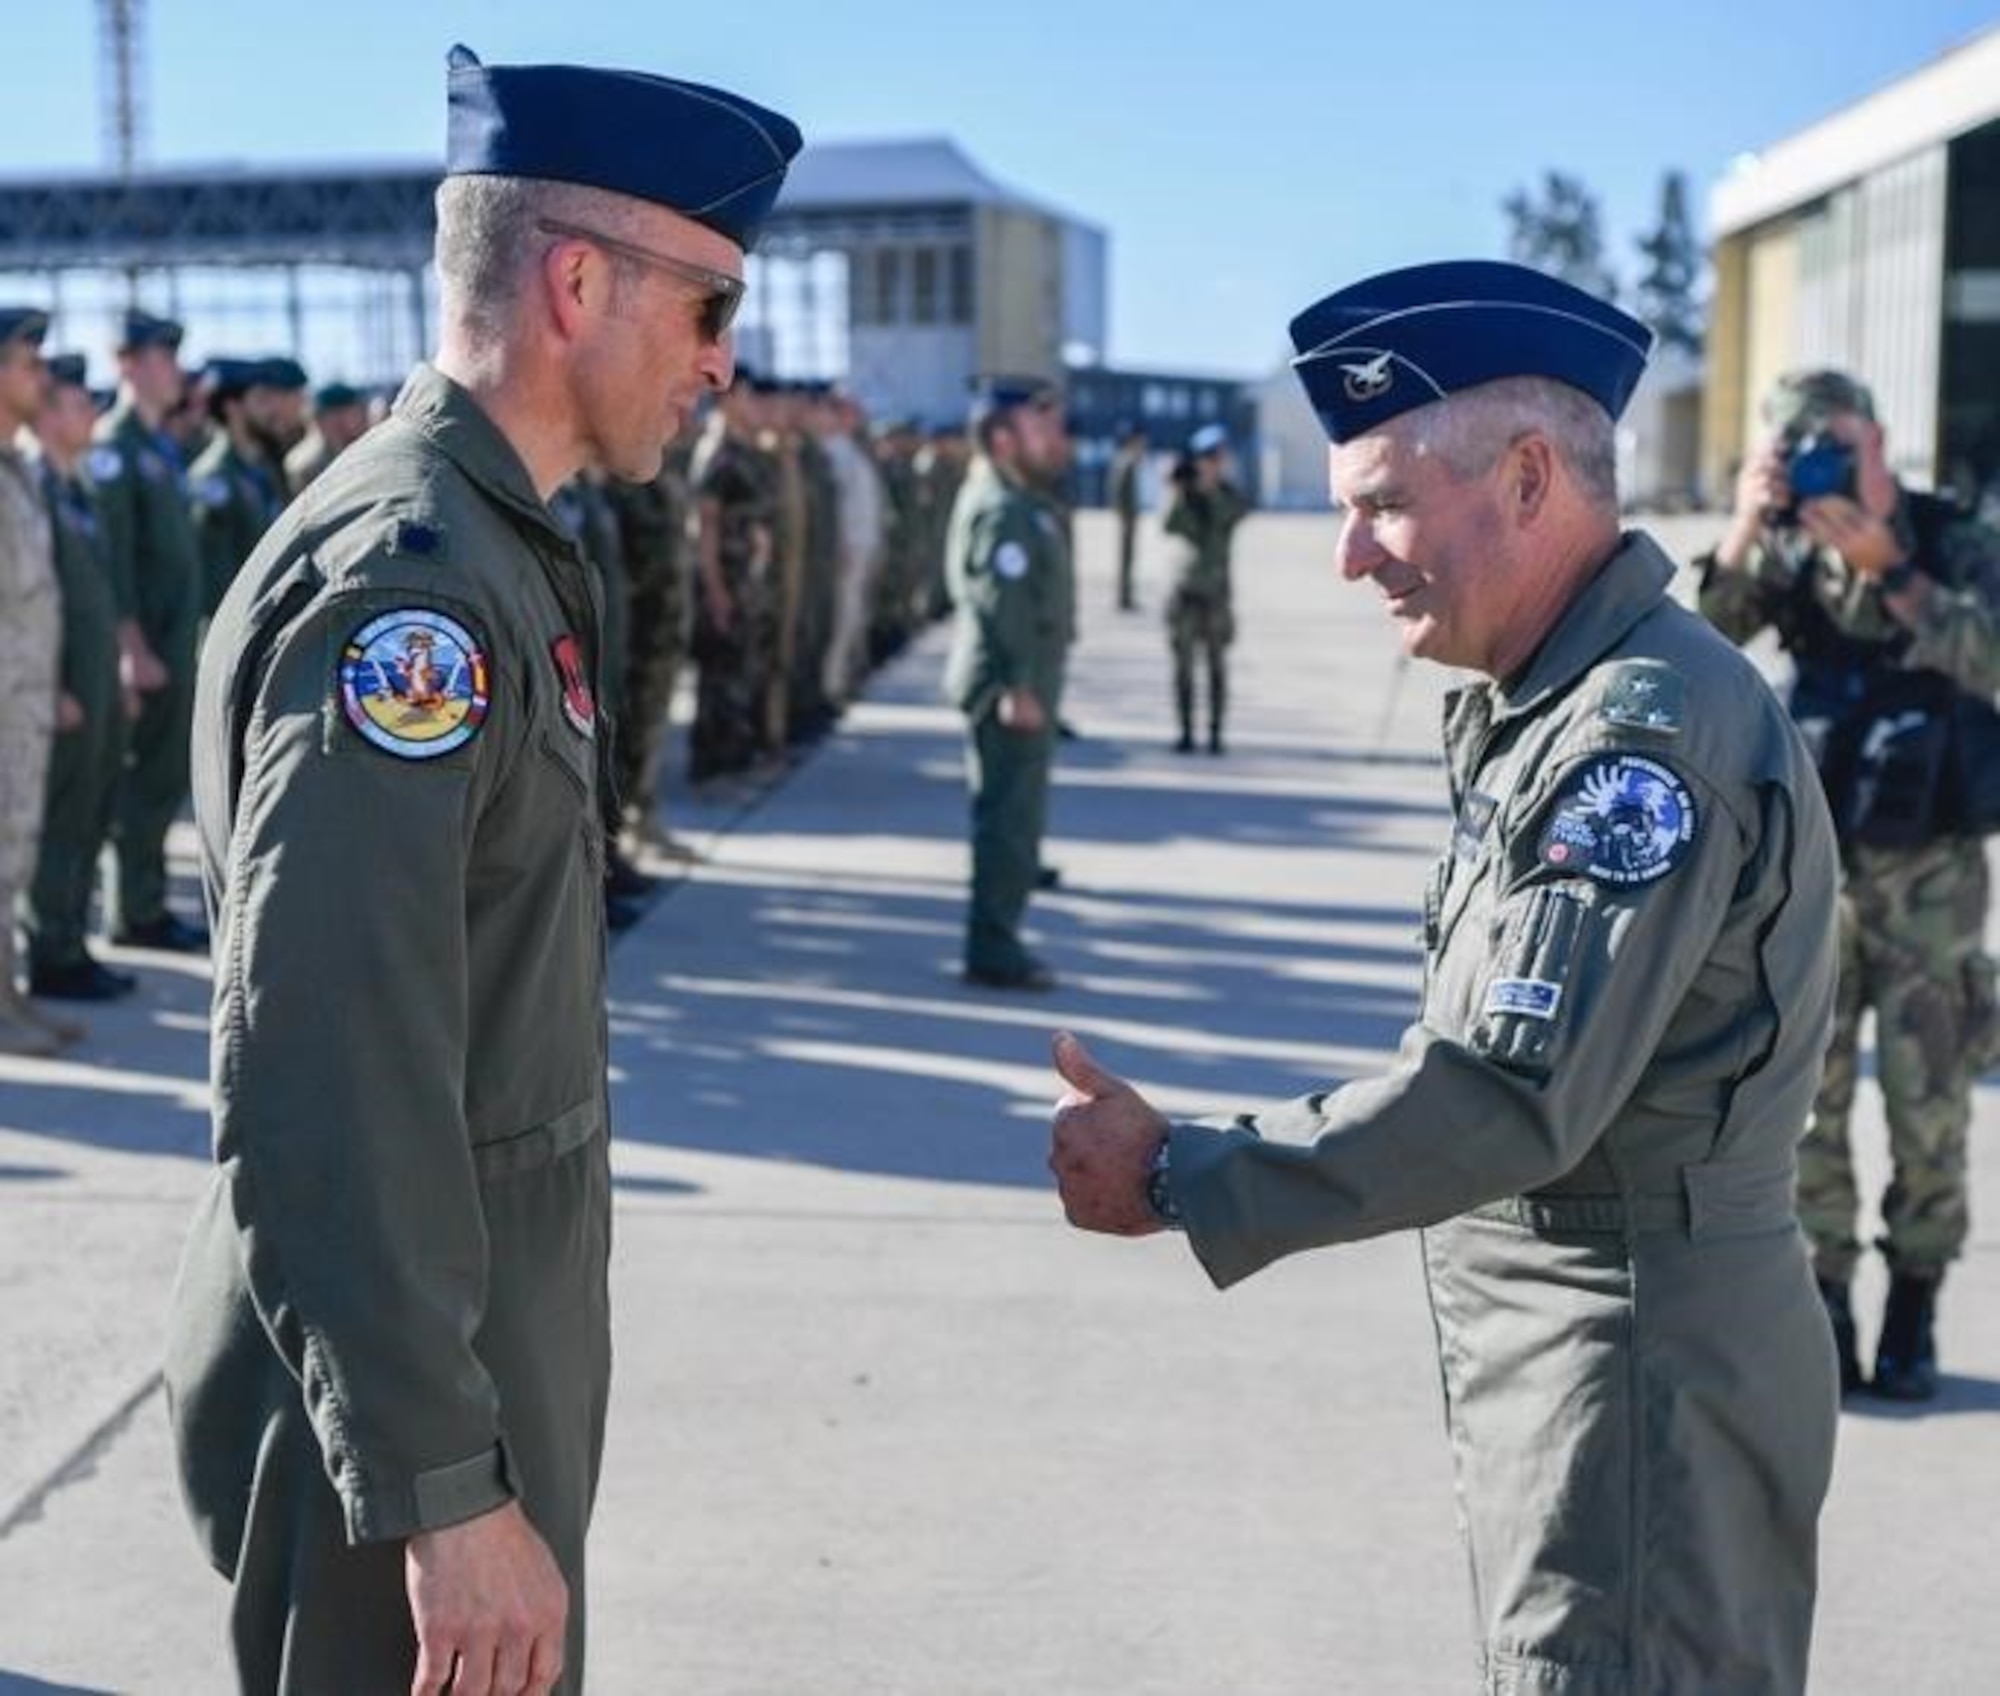 U.S. Air Force Lt. Col. Shaun Loomis, 480th Fighter Squadron commander, (left), is greeted by Lt. Gen. António Jose de Matos Branco, Air Commander of the Portuguese air force, during the opening ceremony at Exercise Real Thaw 22 on Beja Air Base, Portugal, June 26, 2022. Partnerships created through recurring exercises like Real Thaw, support the ability to employ a strategic force in theater. (U.S. Air Force photo by Tech. Sgt. Warren D. Spearman Jr.)